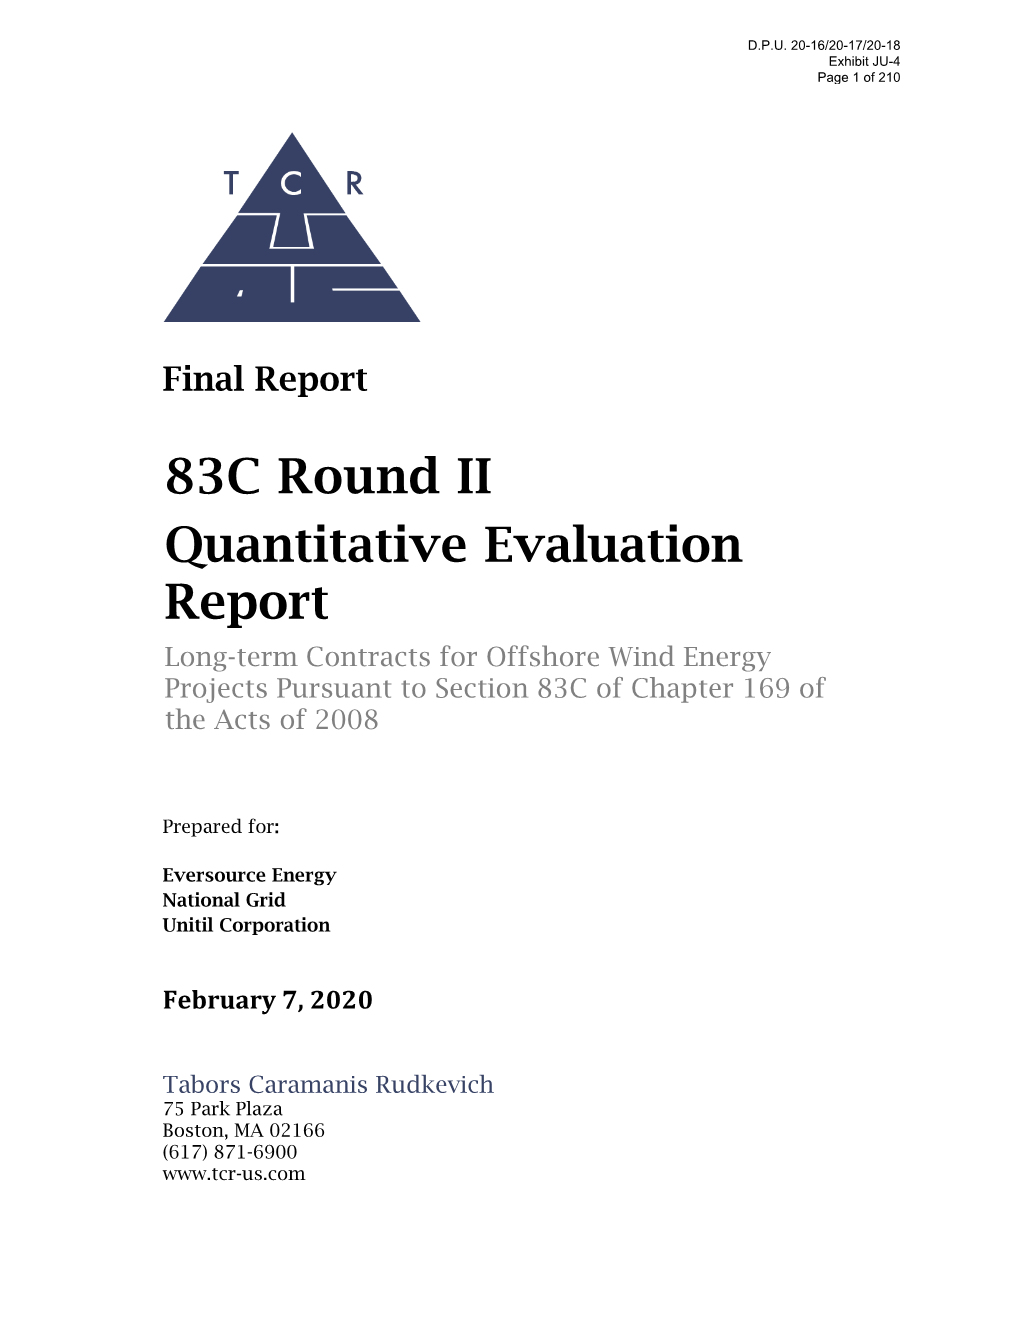 83C Round II Quantitative Evaluation Report Long-Term Contracts for Offshore Wind Energy Projects Pursuant to Section 83C of Chapter 169 of the Acts of 2008